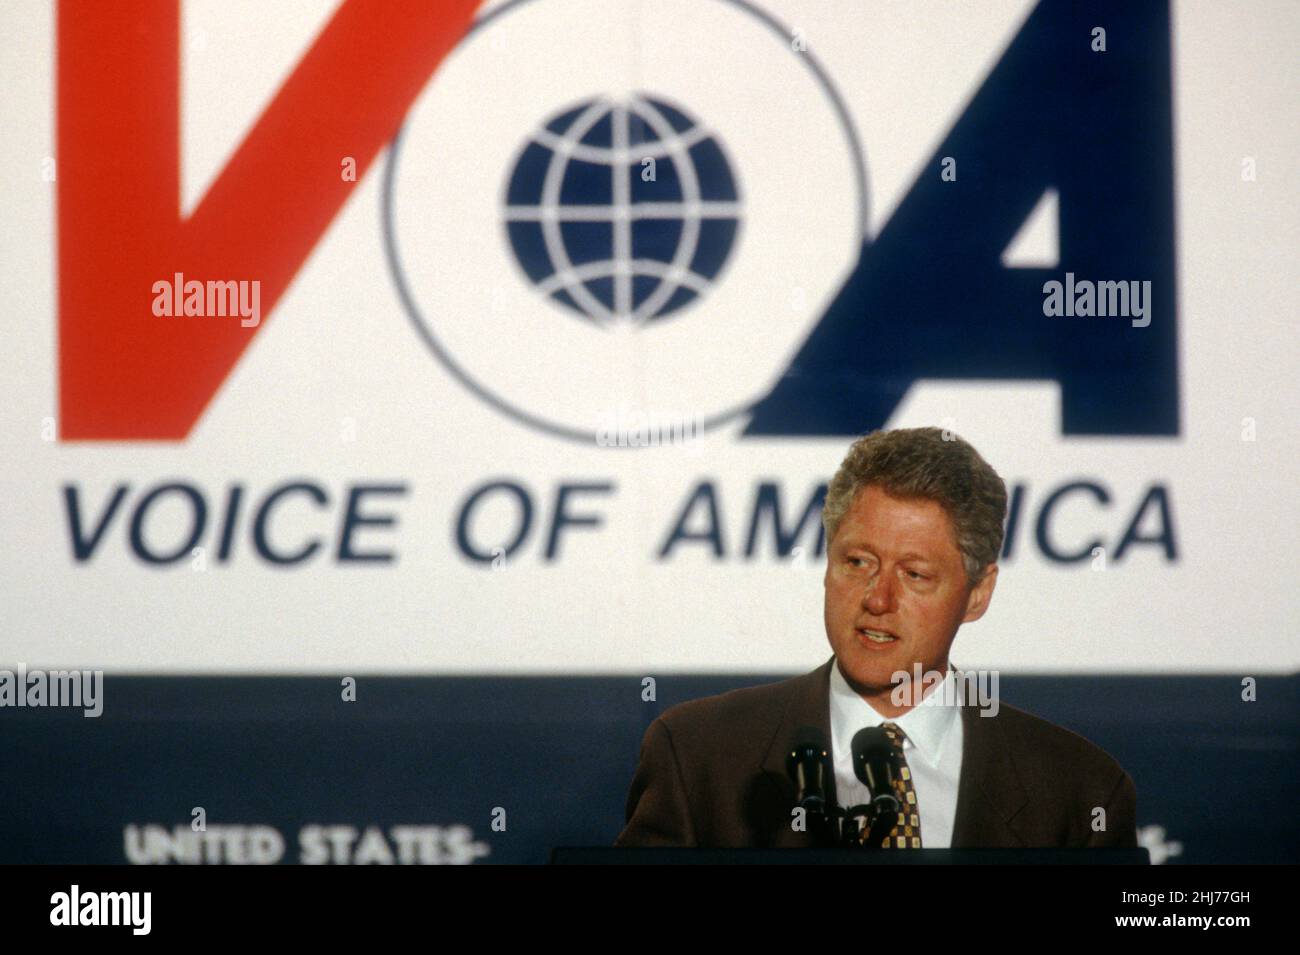 U.S. President Bill Clinton, delivers a foreign policy address on China and the National Interest, at the Voice of America headquarters October 24, 1997 in Washington, D.C. Clinton defended his push for better relations with China. Stock Photo